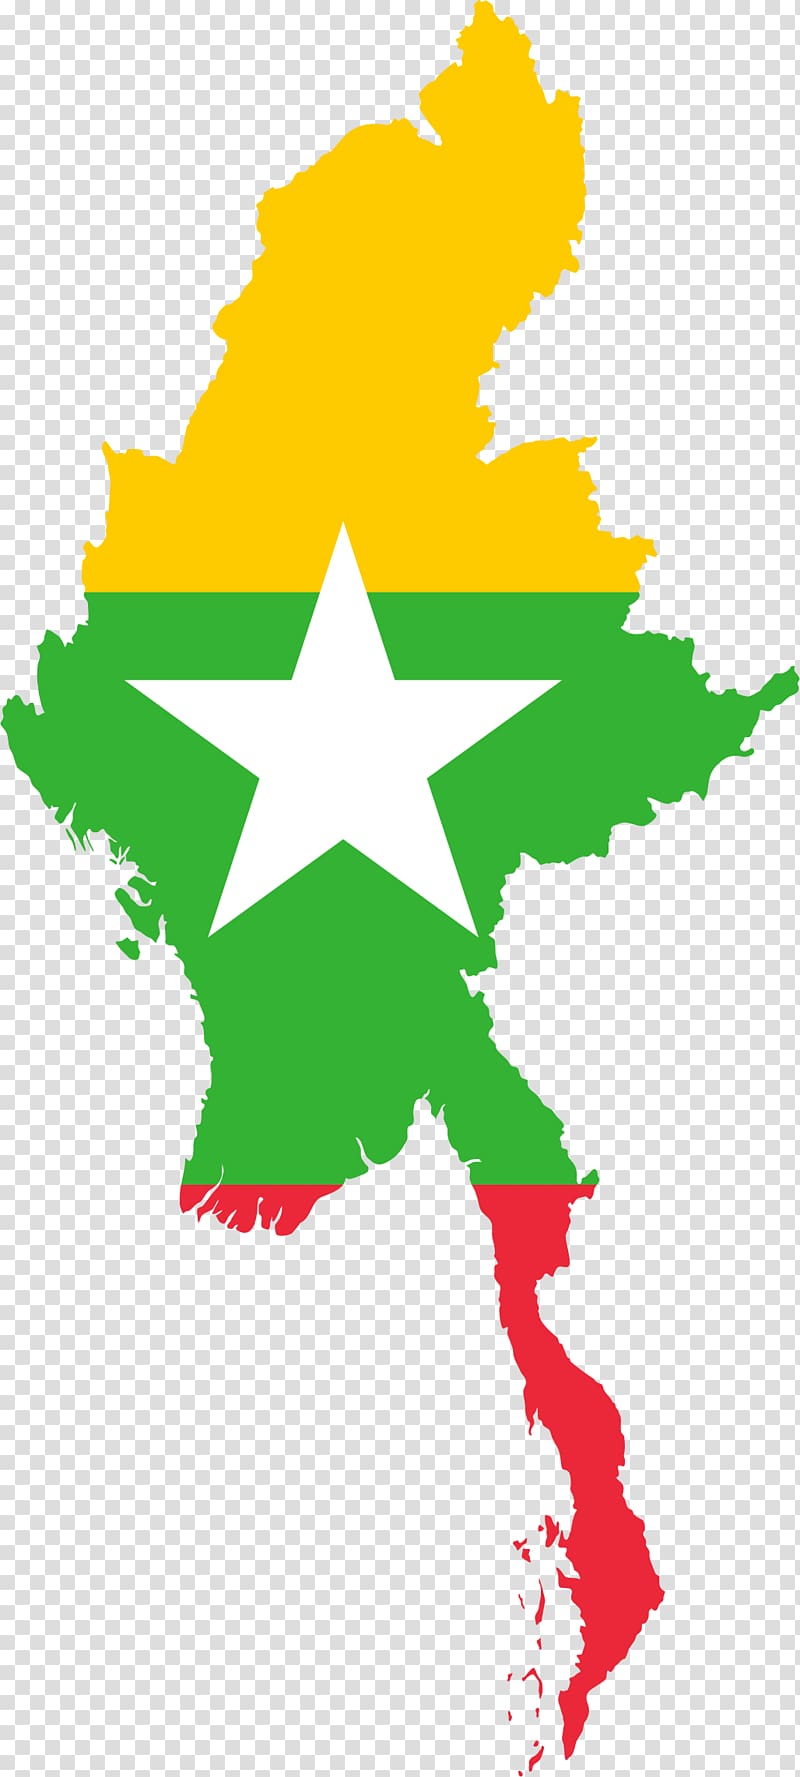 yellow, red, and green map illustration against blue background, Burma Flag of Myanmar Map, map transparent background PNG clipart